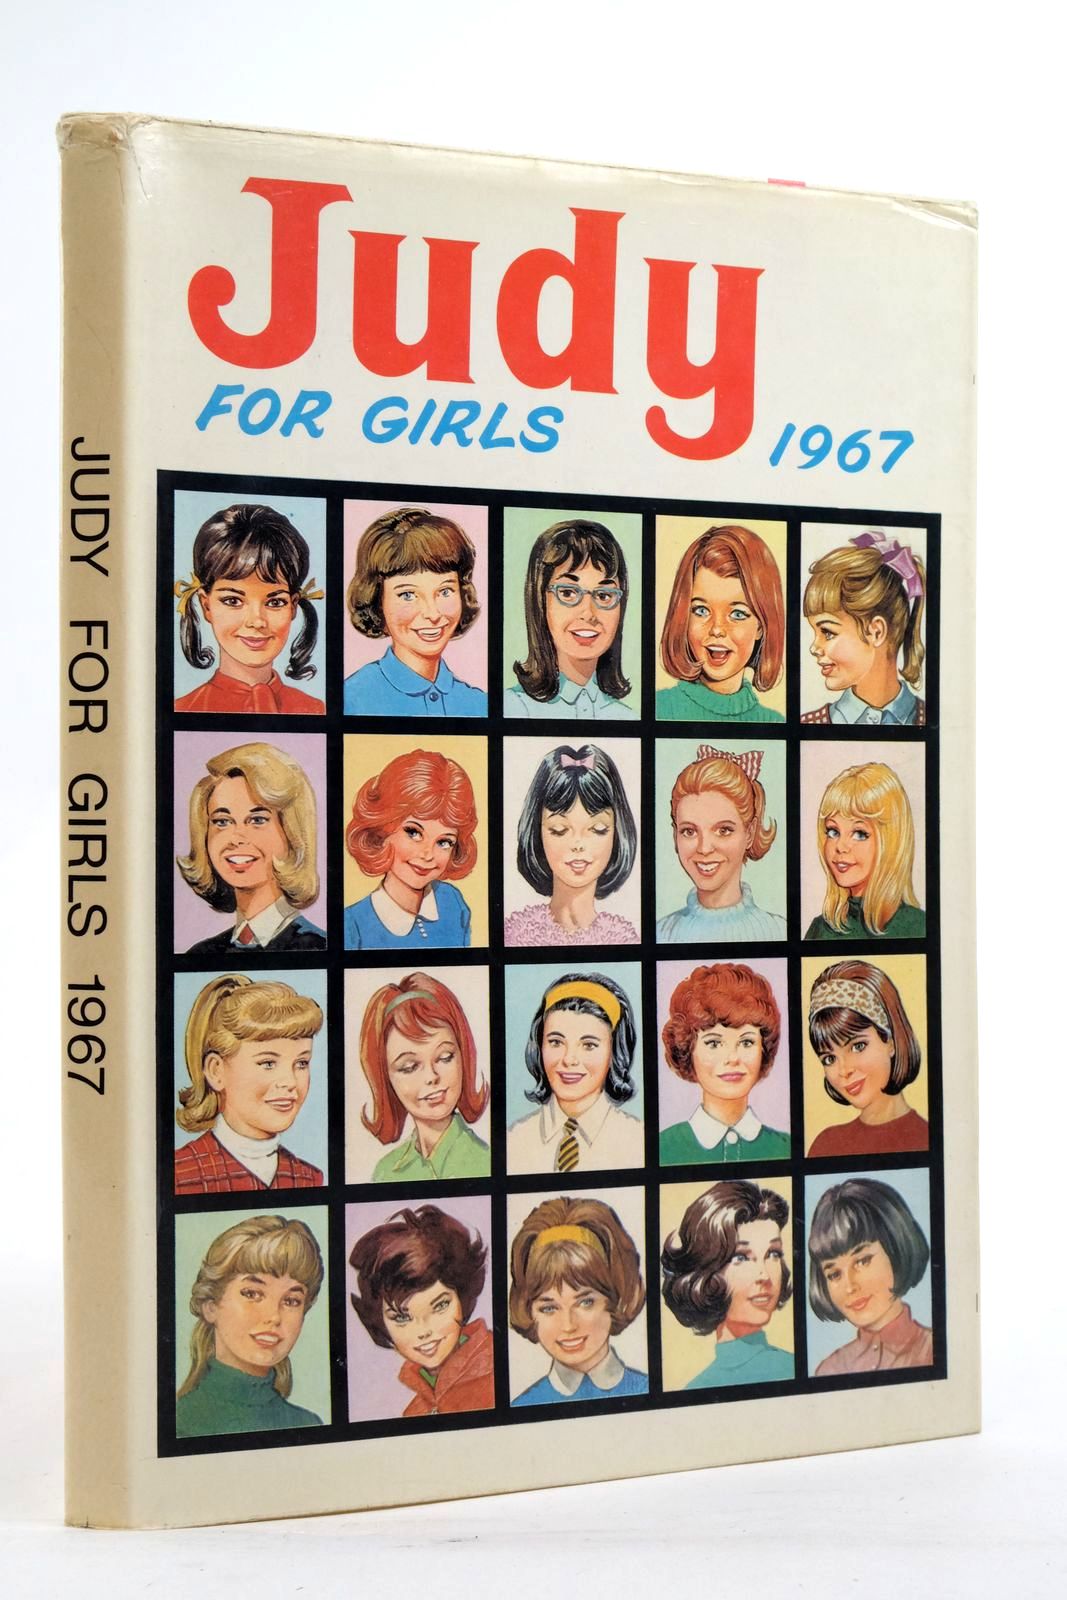 Photo of JUDY FOR GIRLS 1967 published by D.C. Thomson &amp; Co Ltd. (STOCK CODE: 2138028)  for sale by Stella & Rose's Books